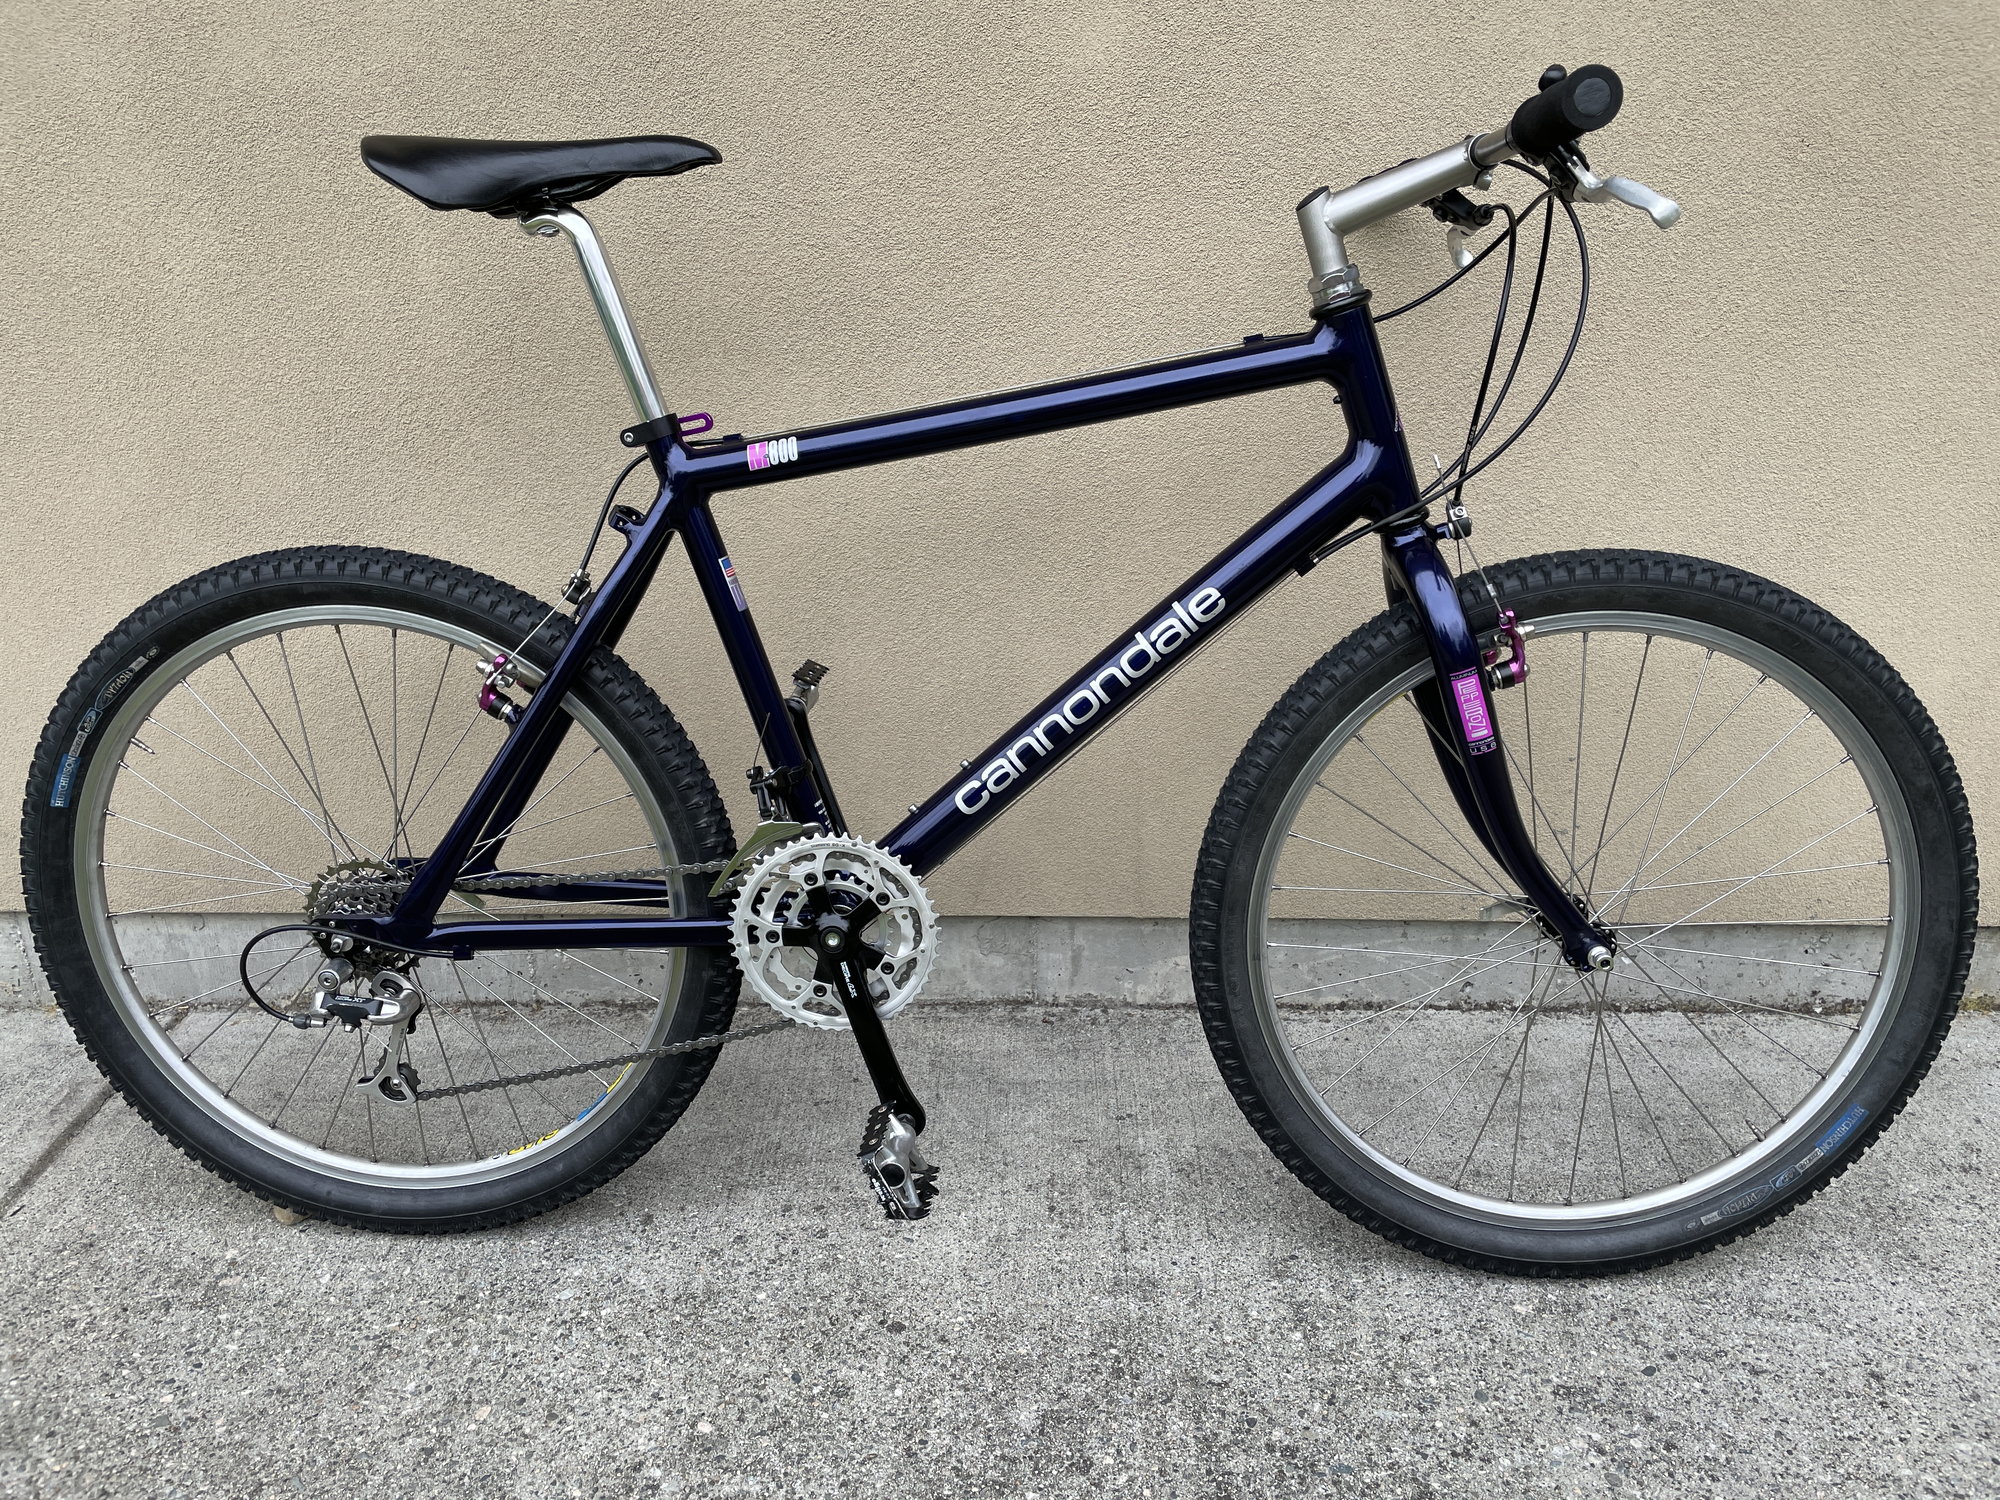 1993 Cannondale M800 Bote Bike Forums